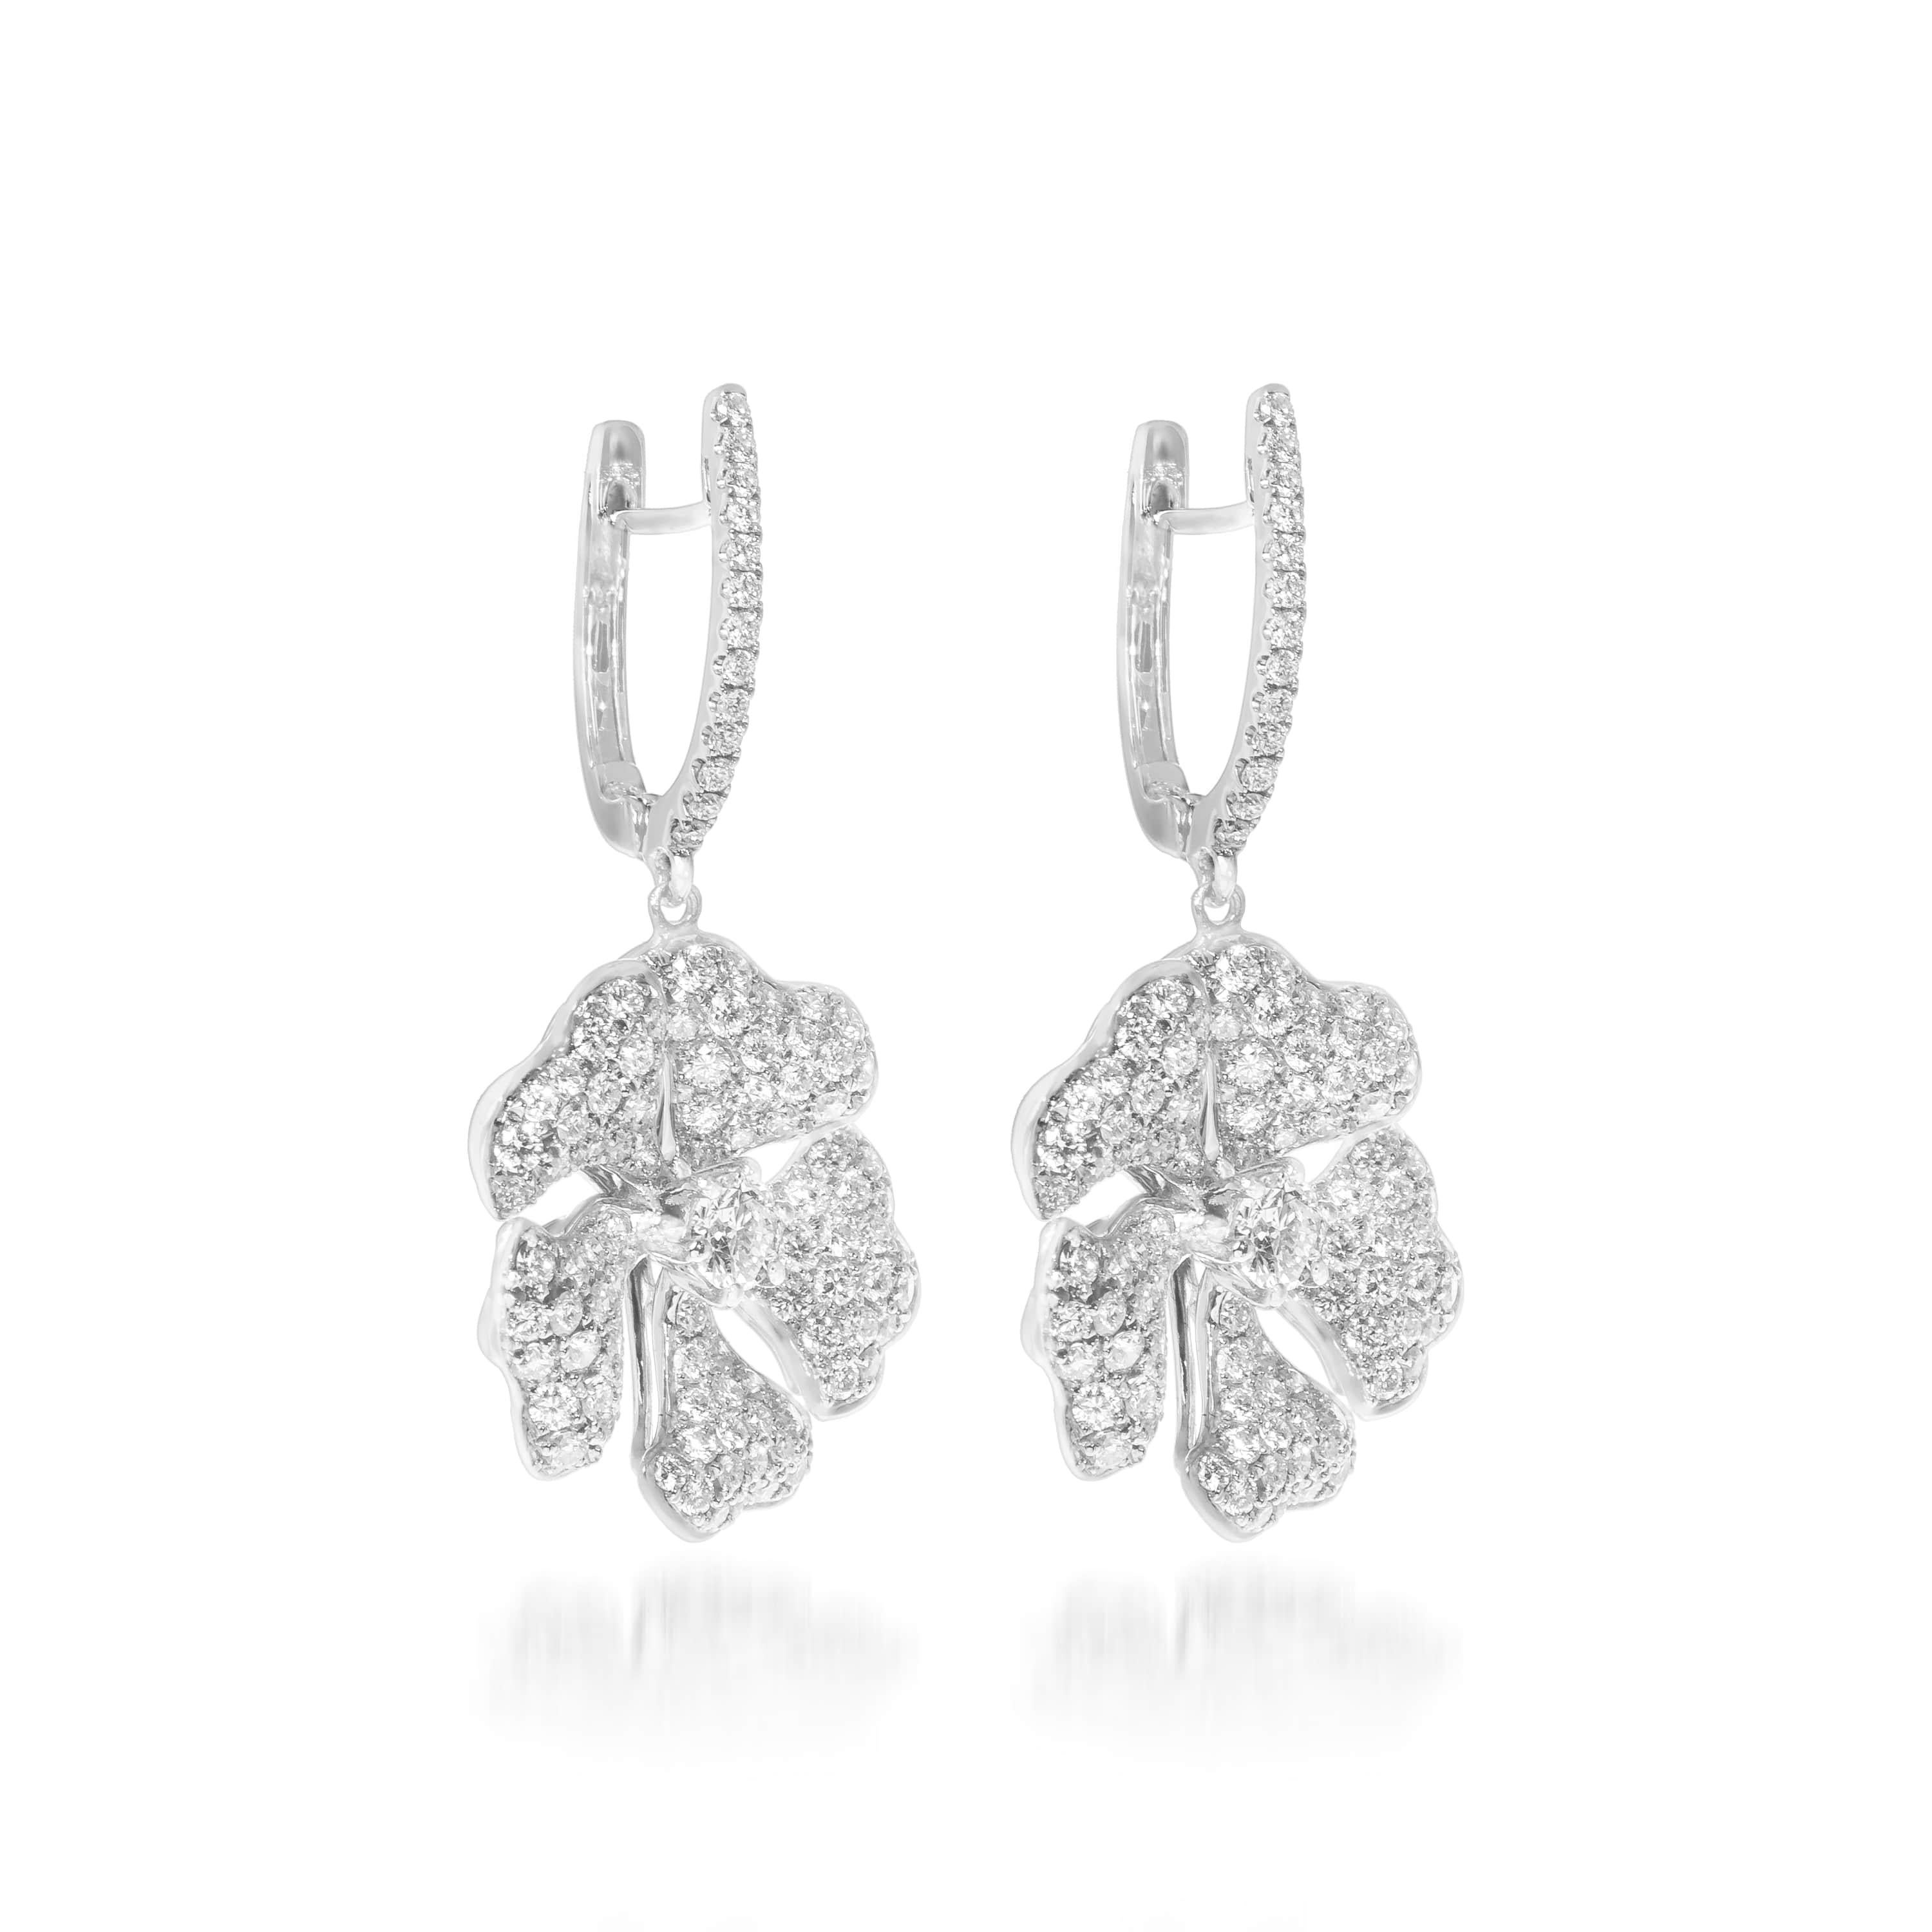 Bloom Gold and Pavé Diamond Drop Flower Earrings in 18K White Gold

Inspired by the exquisite petals of the alpine cinquefoil flower, the Bloom collection combines the richness of diamonds and precious metals with the light versatility of this